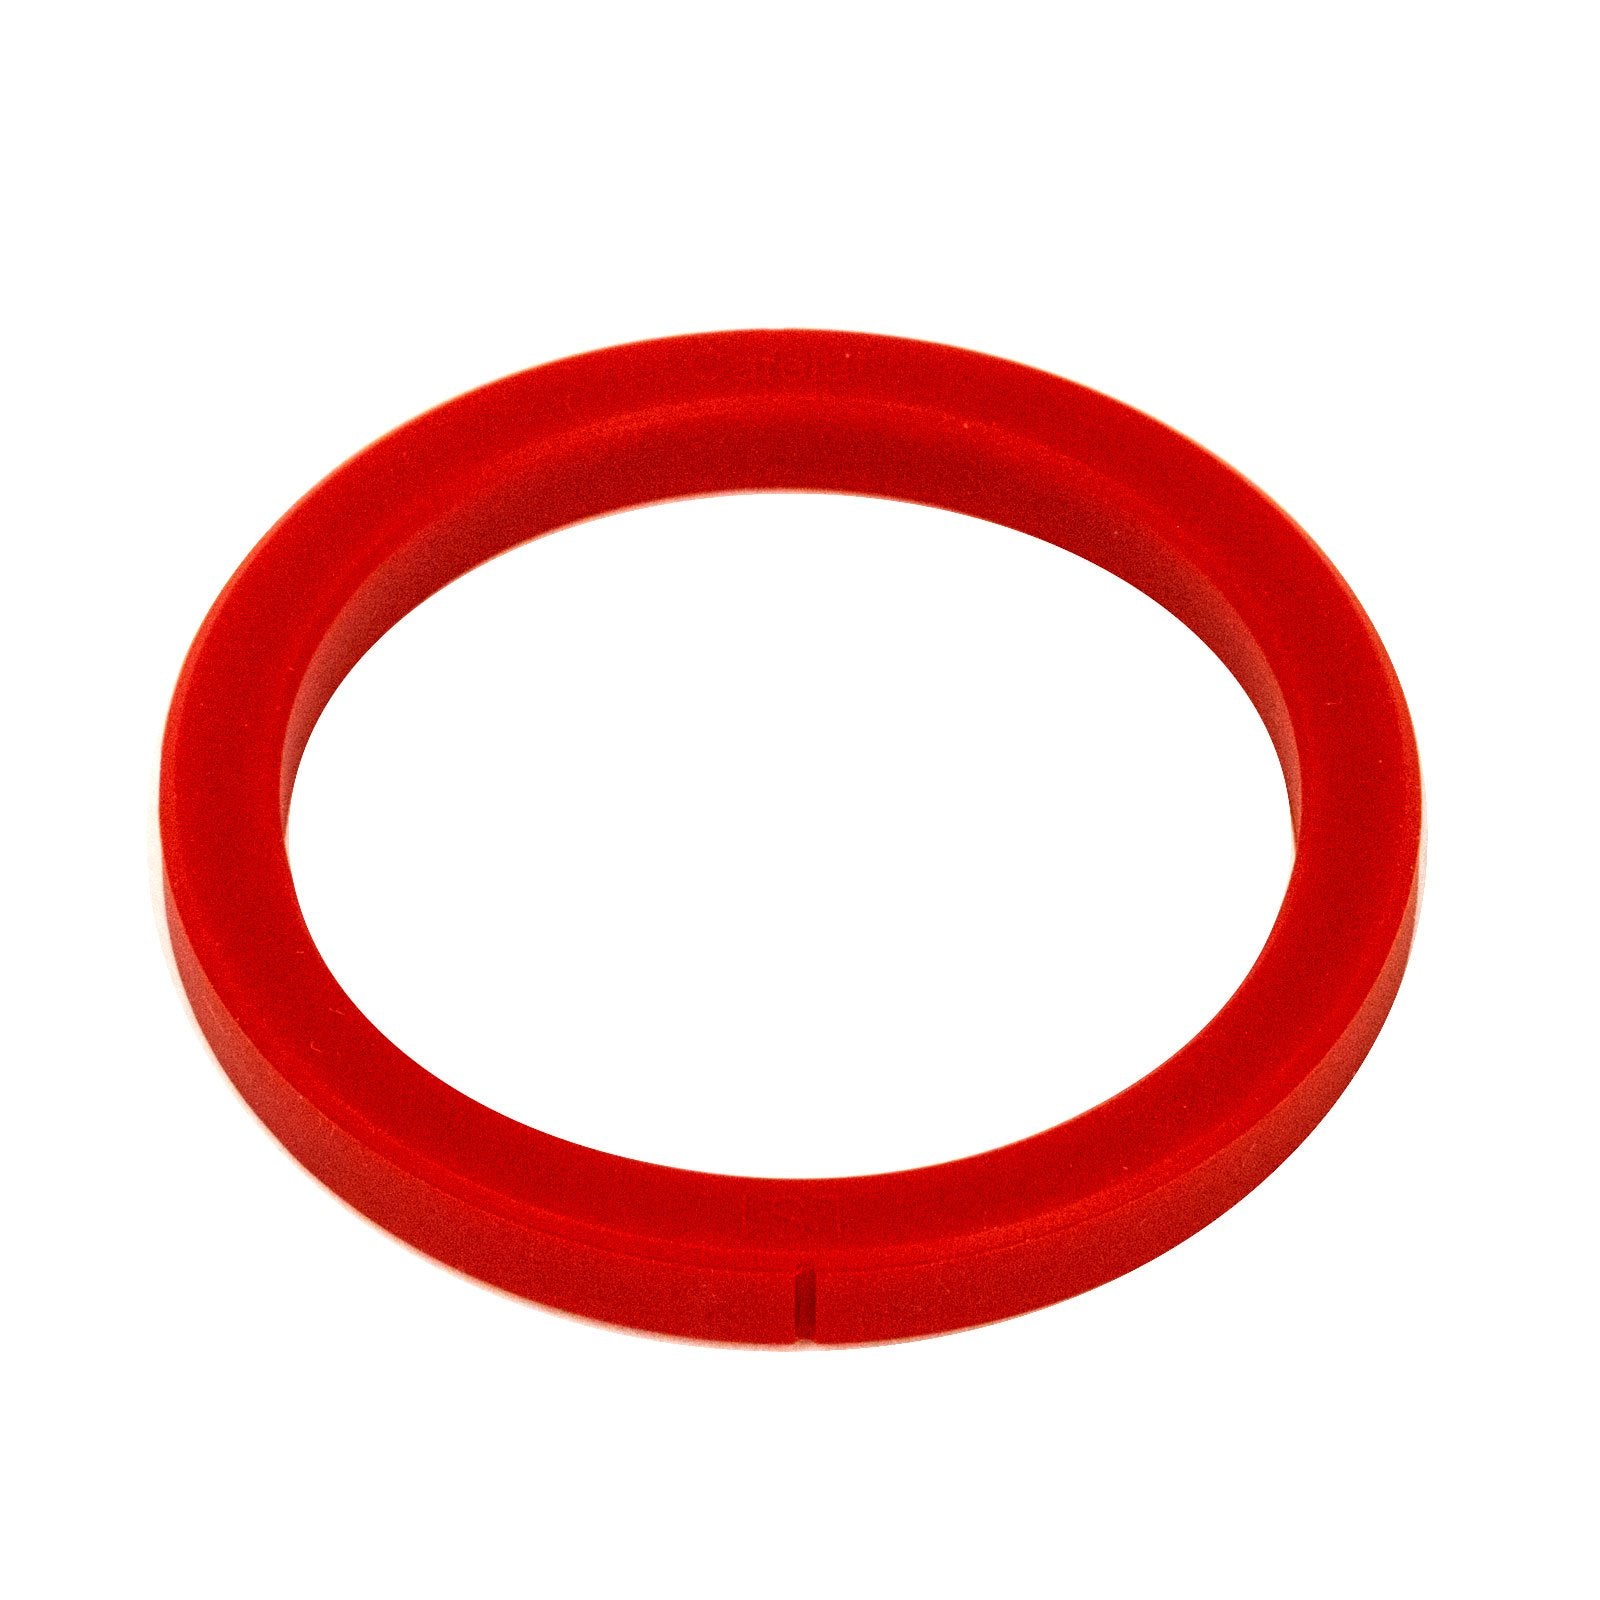 https://clivecoffee.com/cdn/shop/products/Cafelat-Silicon-Gasket-For-La-Spaziale-Tech-Part-02.jpg?v=1574374256&width=1600